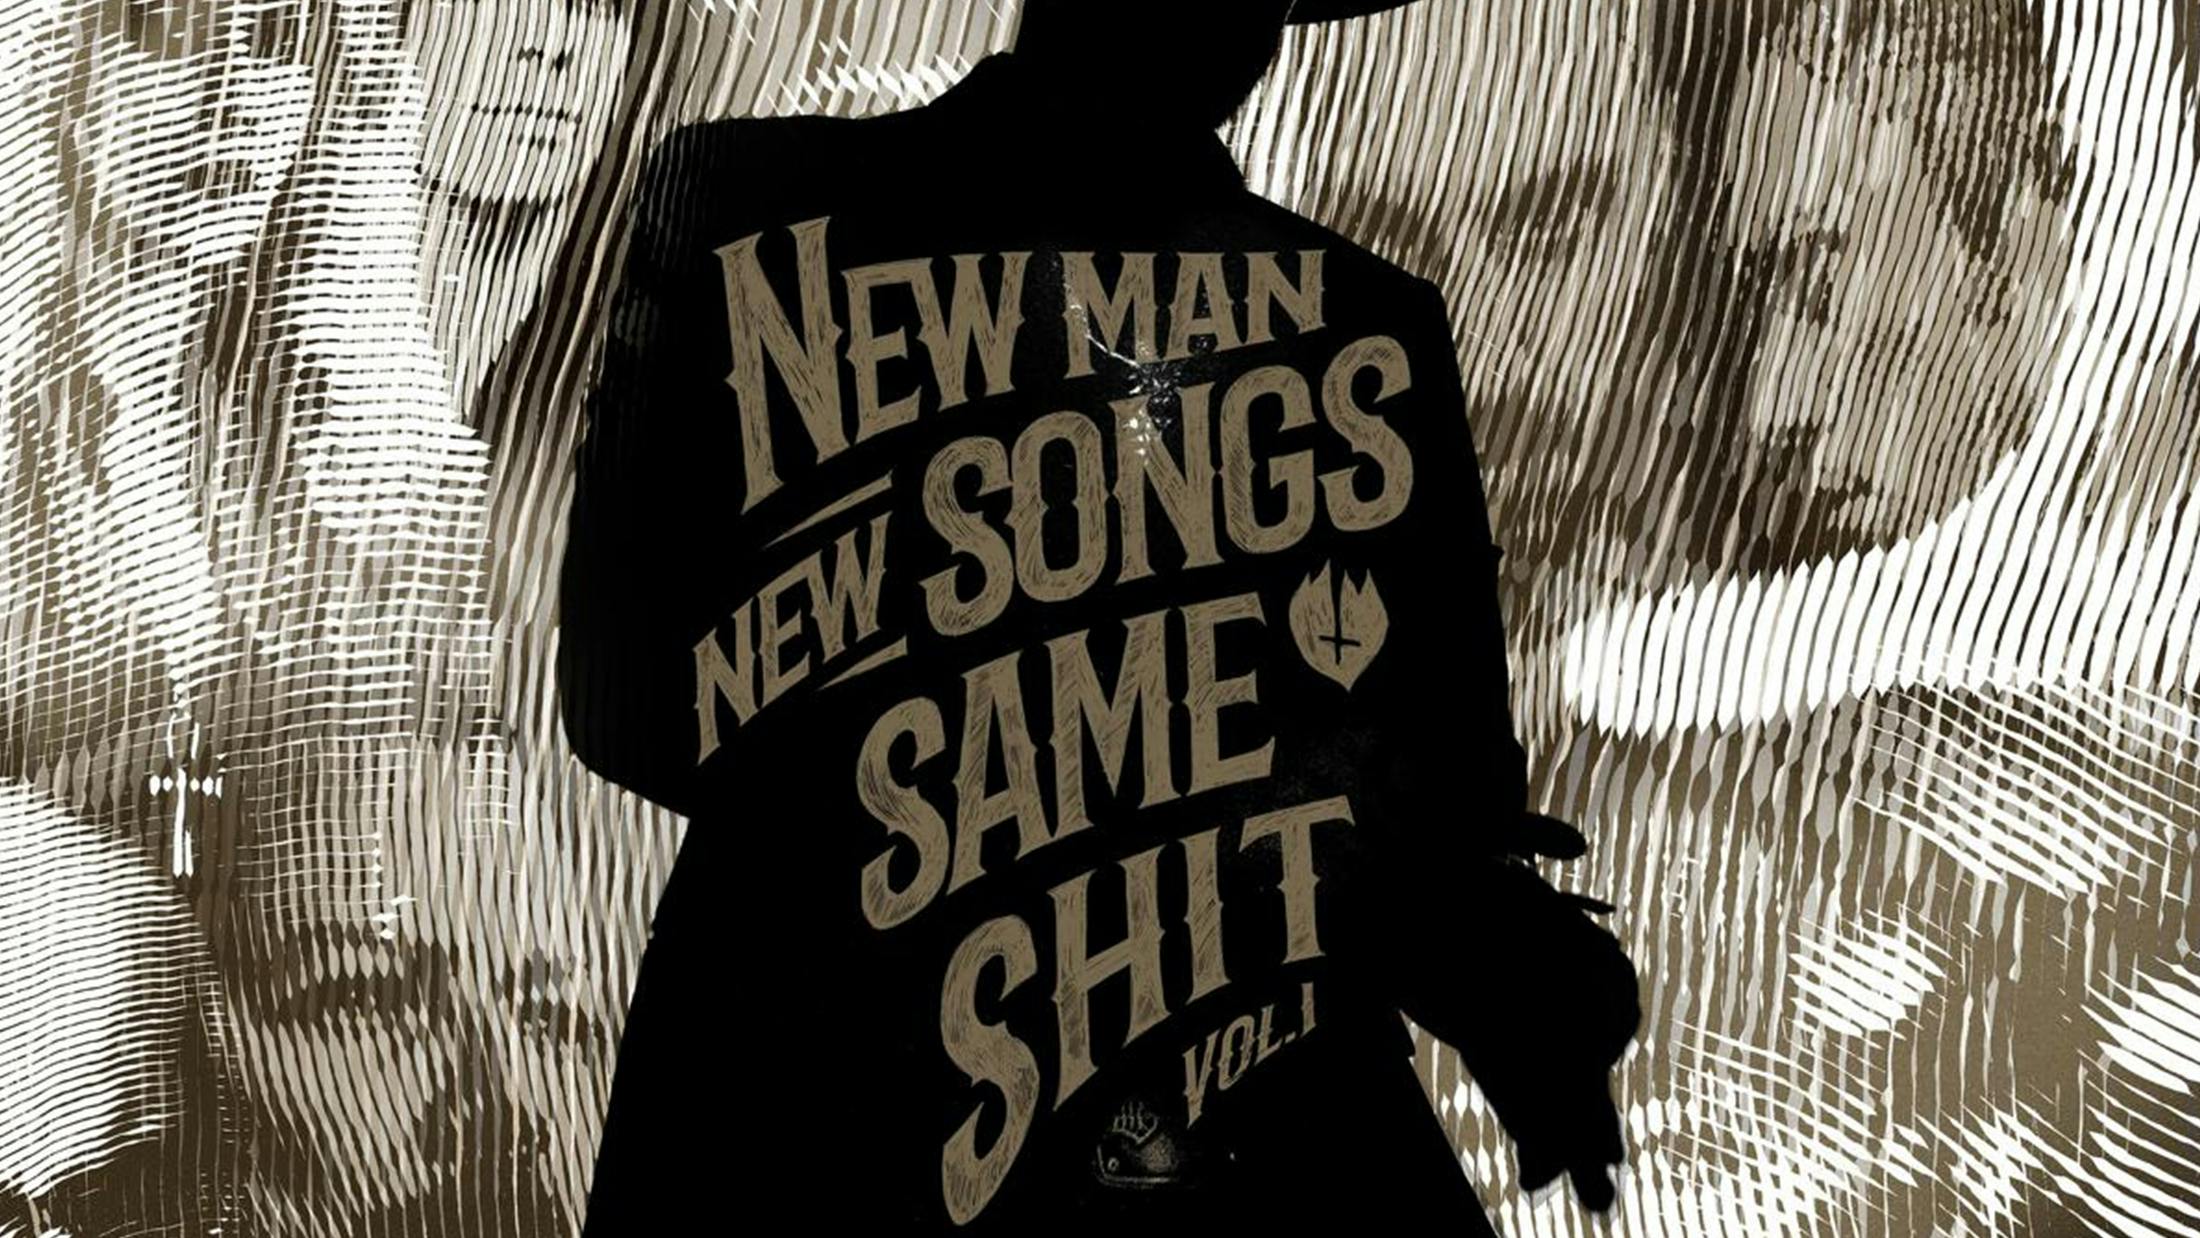 Album Review: Me And That Man – New Man, New Songs, Same Shit Vol 1